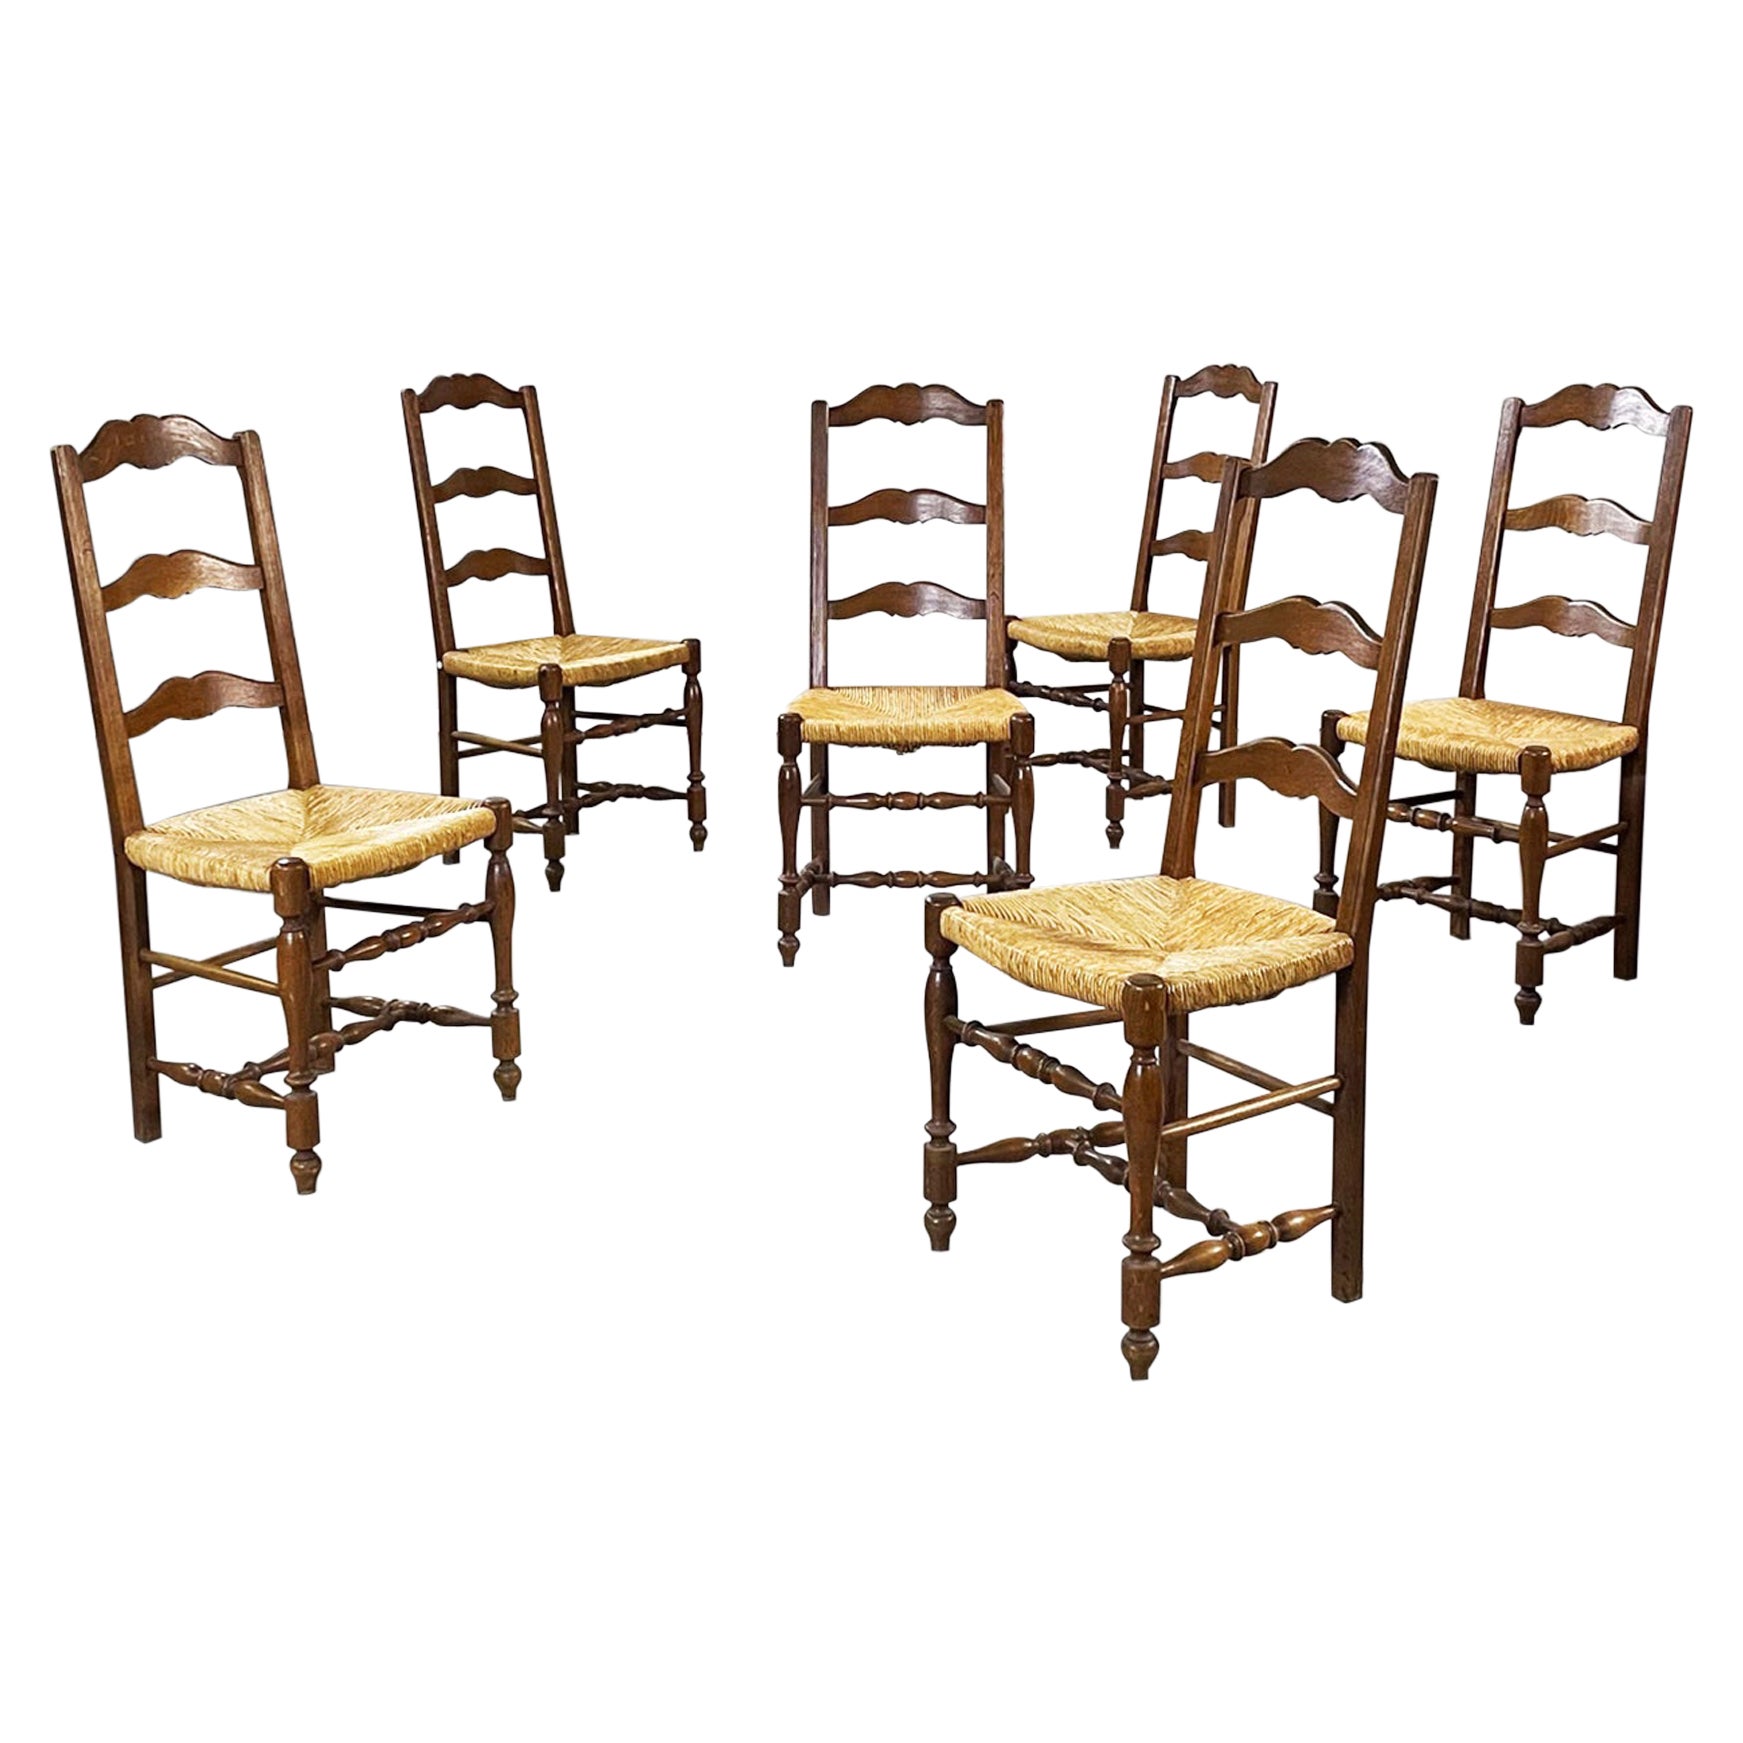 Italian Nineteenth Century Finely Crafted Wooden and Straw Chairs, Late1800s